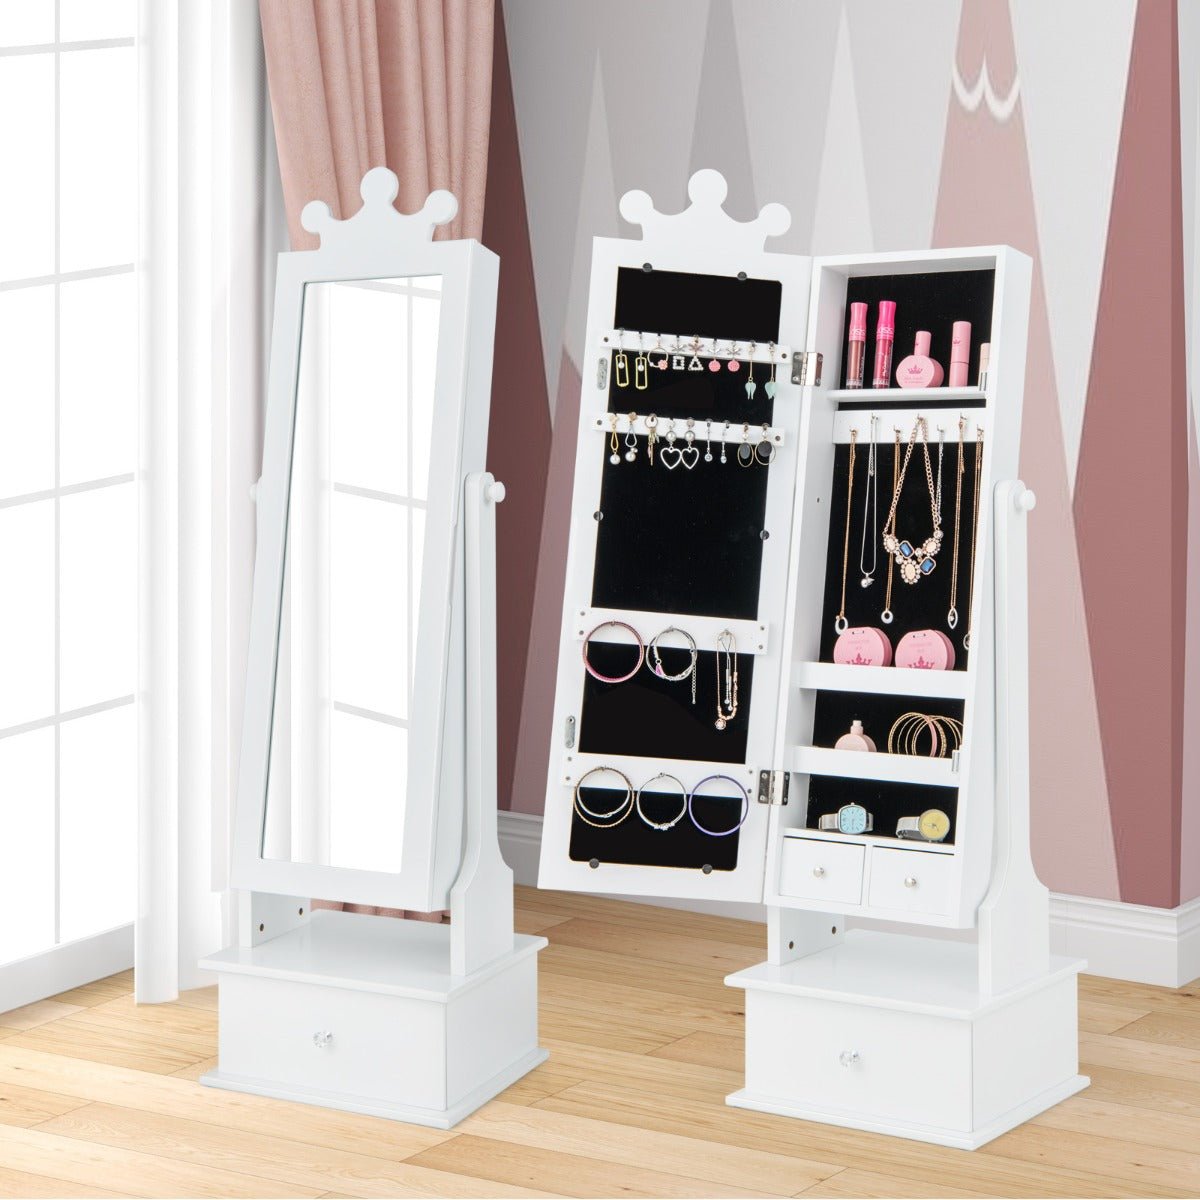 2-in-1 Kids Play Jewelry Armoire with Full Length Mirror &amp; Storage Drawers-White